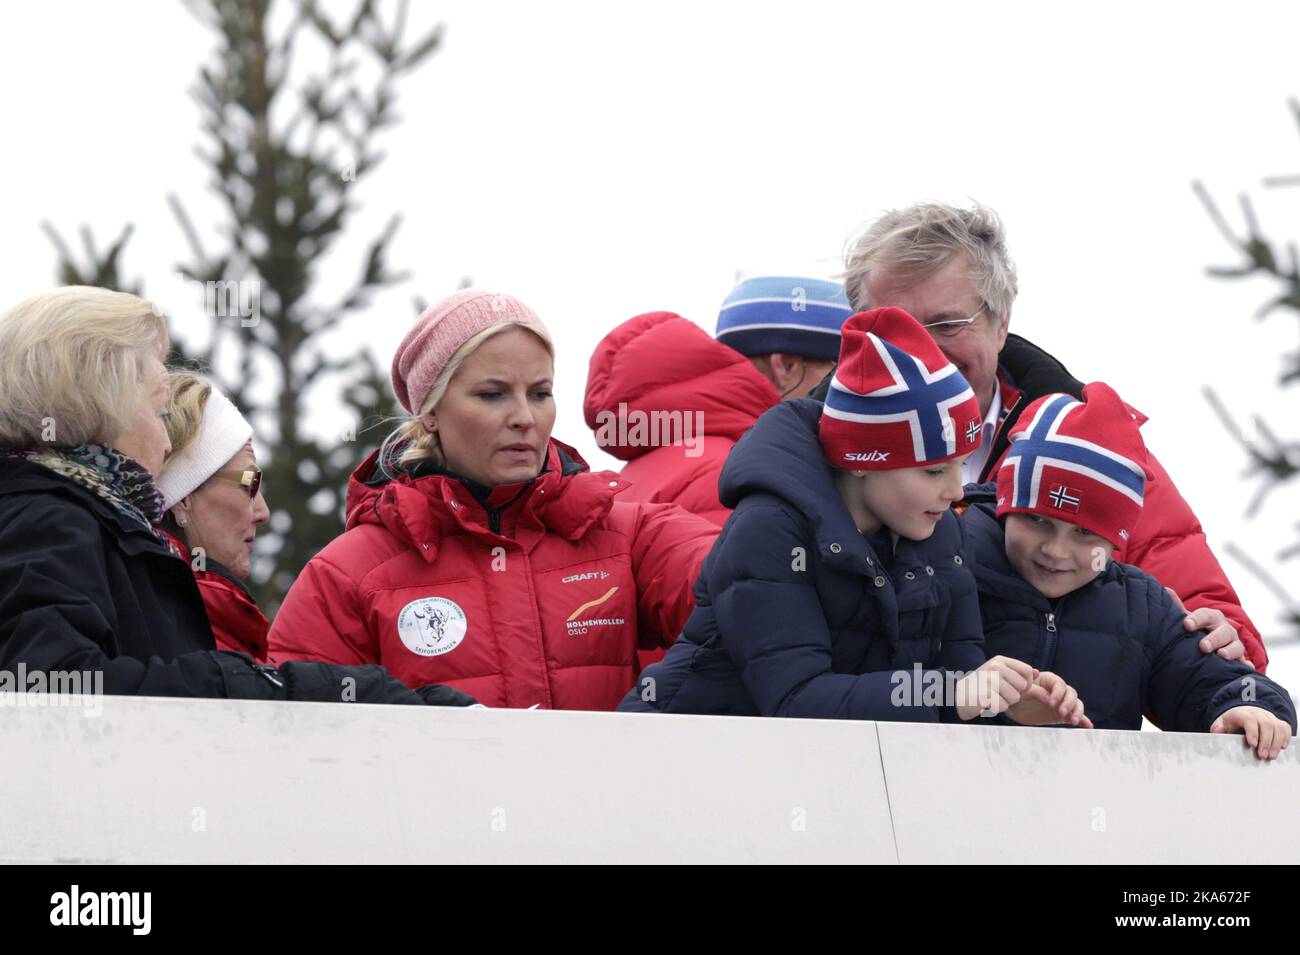 The Norwegian Royal Family visits Holmenkollen at Ski World Cup, watching ski jump. From left: Princess Beatrix of Netherland, Queen Sonja, Crown Princess Mette Marit., Princess Ingrid Alexandra  and prince  Sverre Magnus. Behind them is Fabian Stang, Mayor of Oslo.       Stock Photo